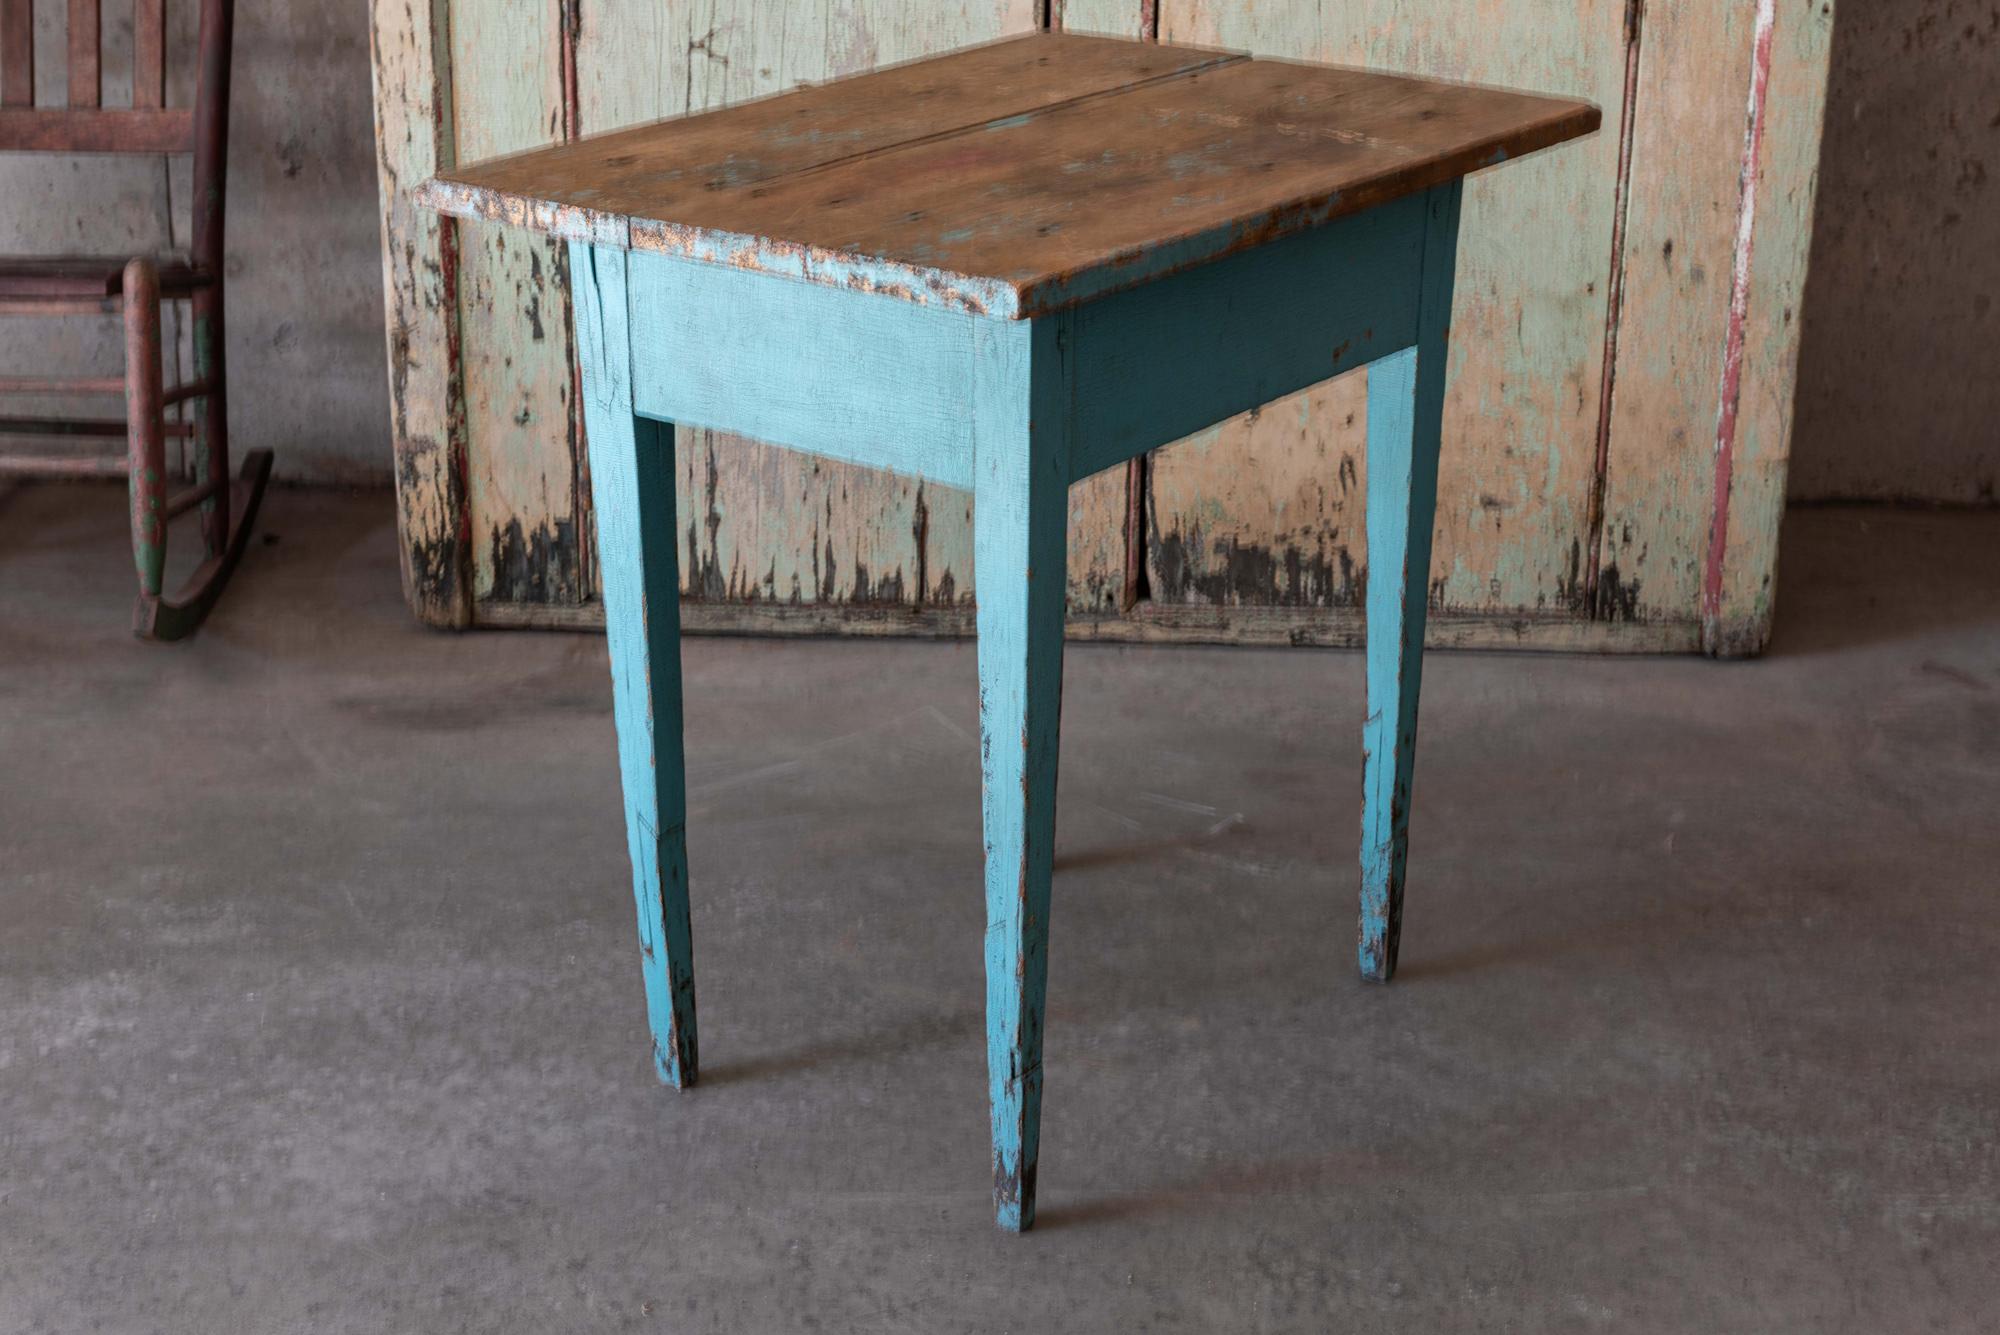 Circa 1860

19thC rustic painted side table with tapered legs

Sourced form North America - Lanark County

(Signs of past repairs)

Measures: W75 x H73 x 53D cm.

      